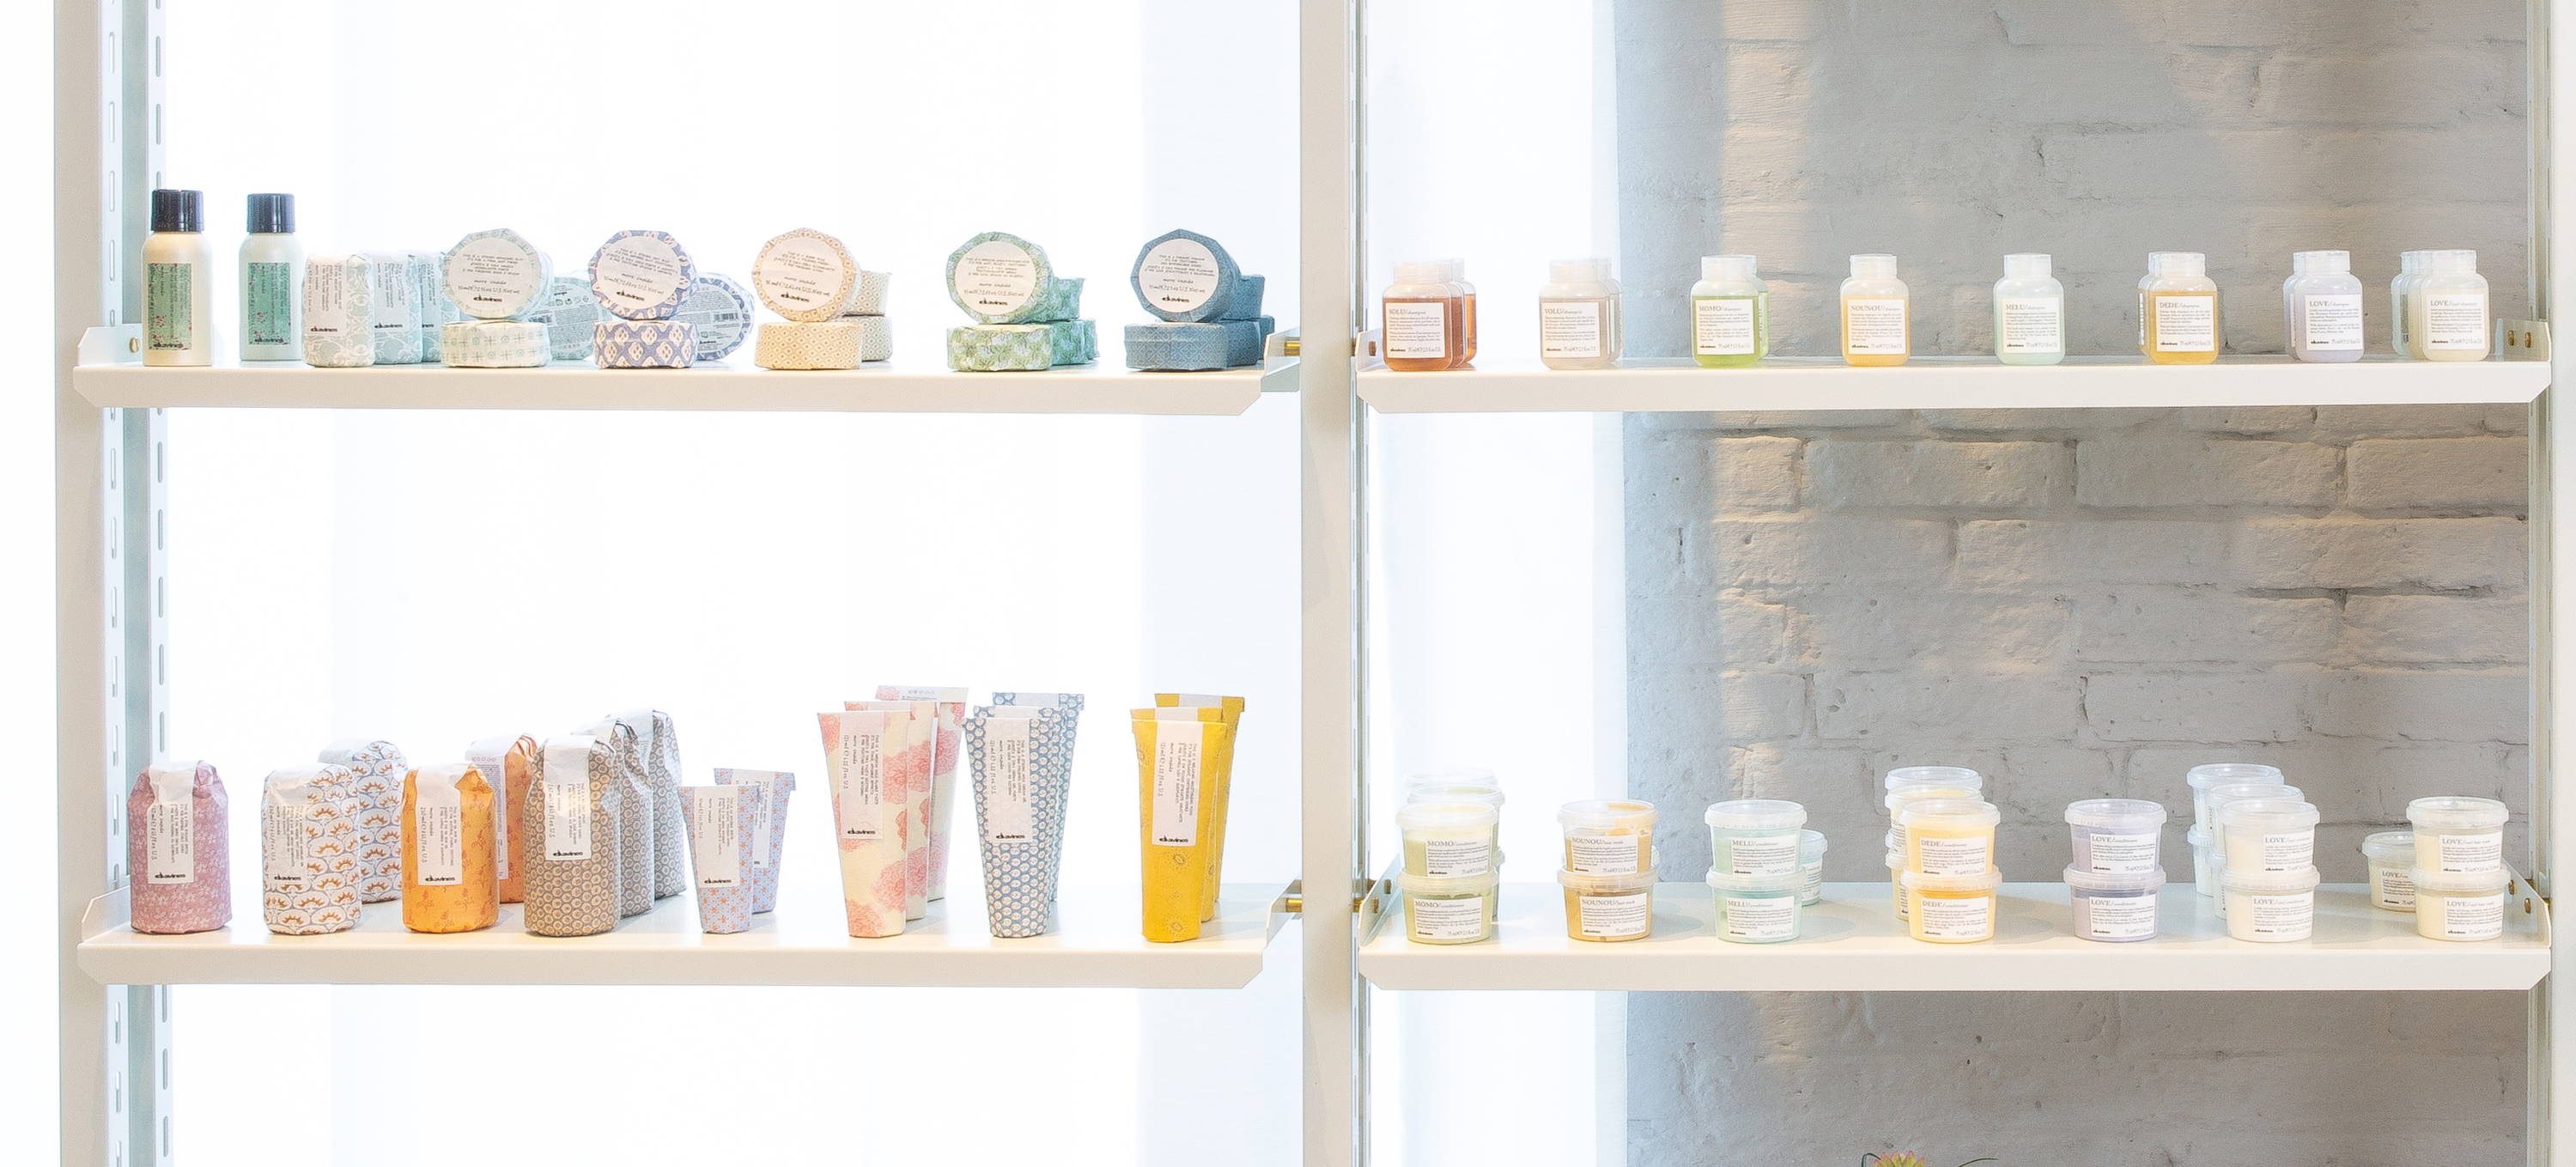 Davines styling products